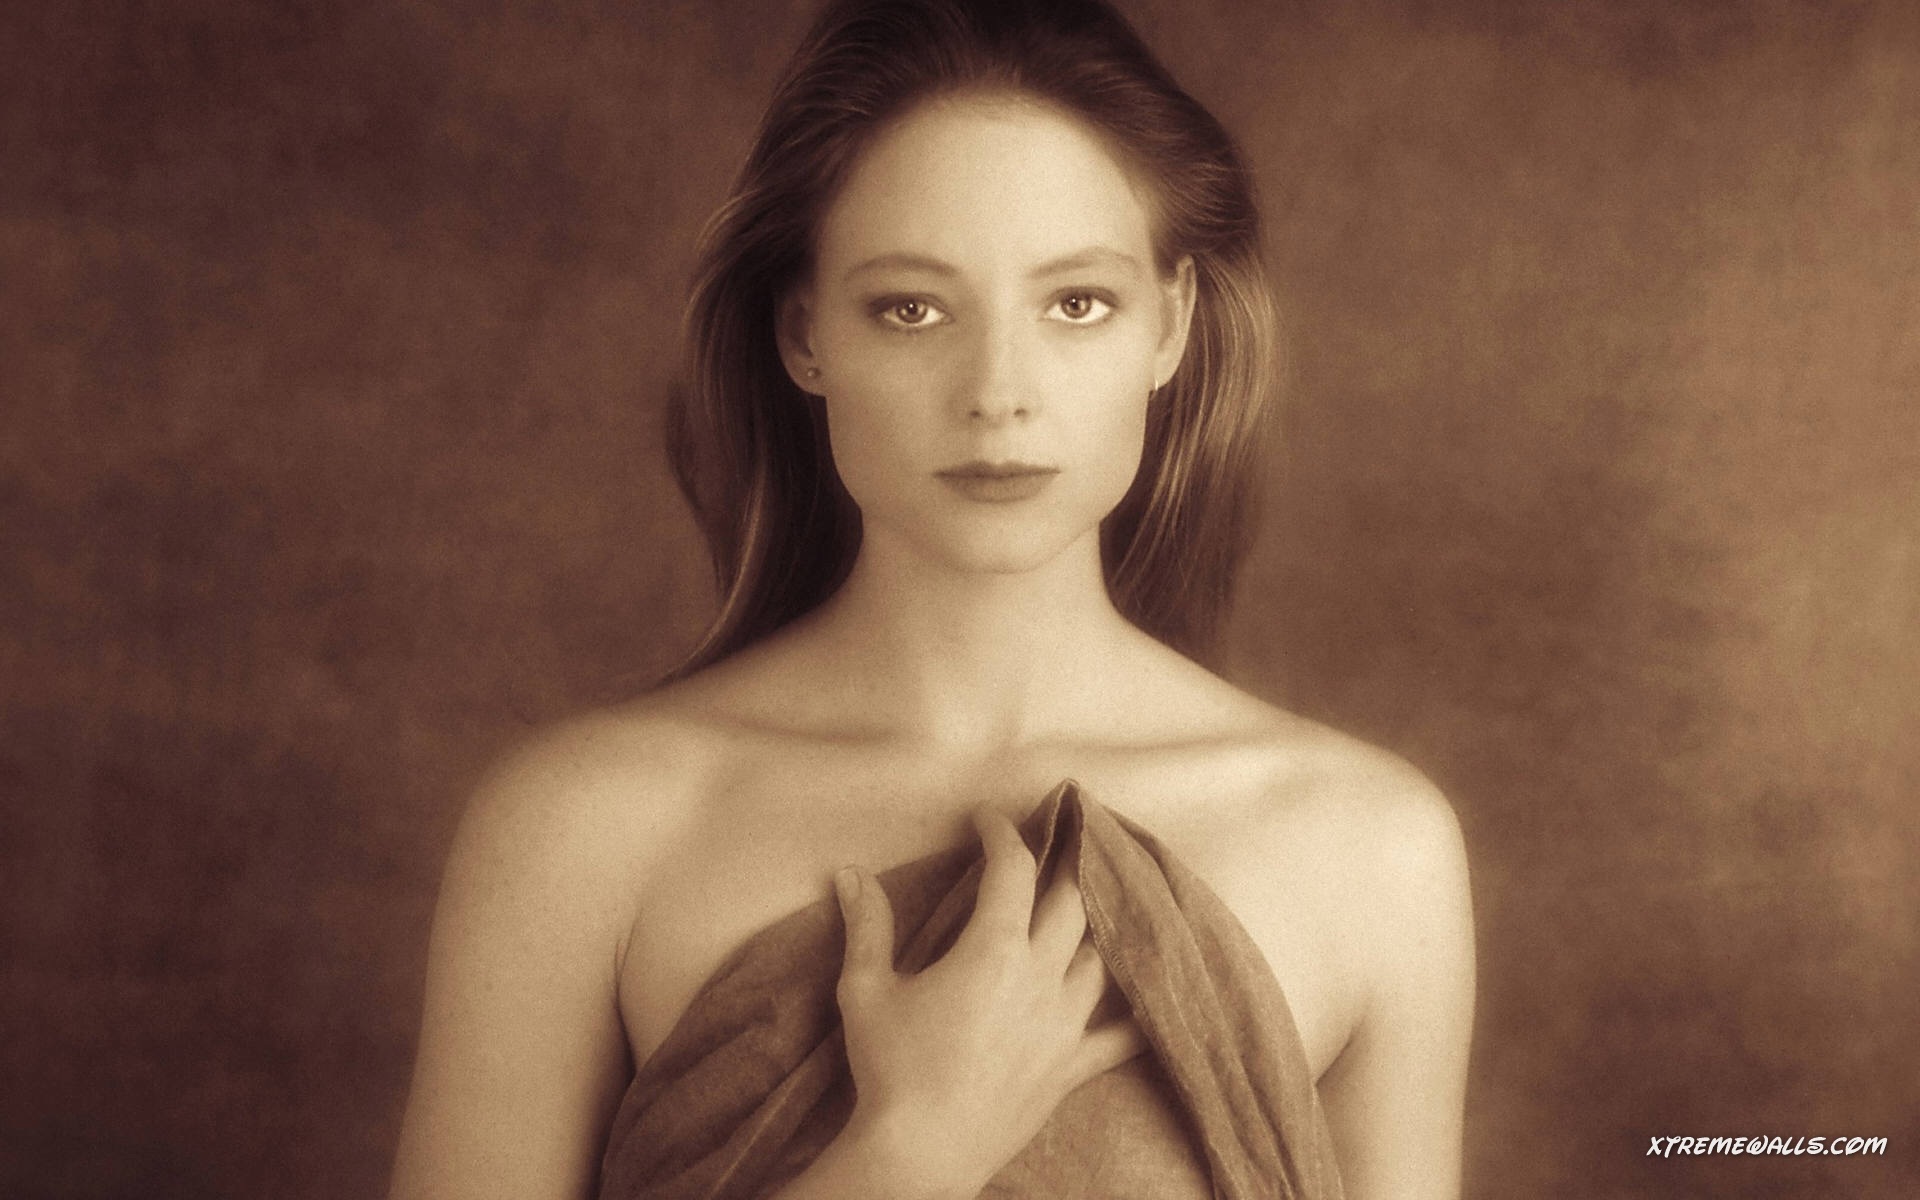 Images of jodie foster